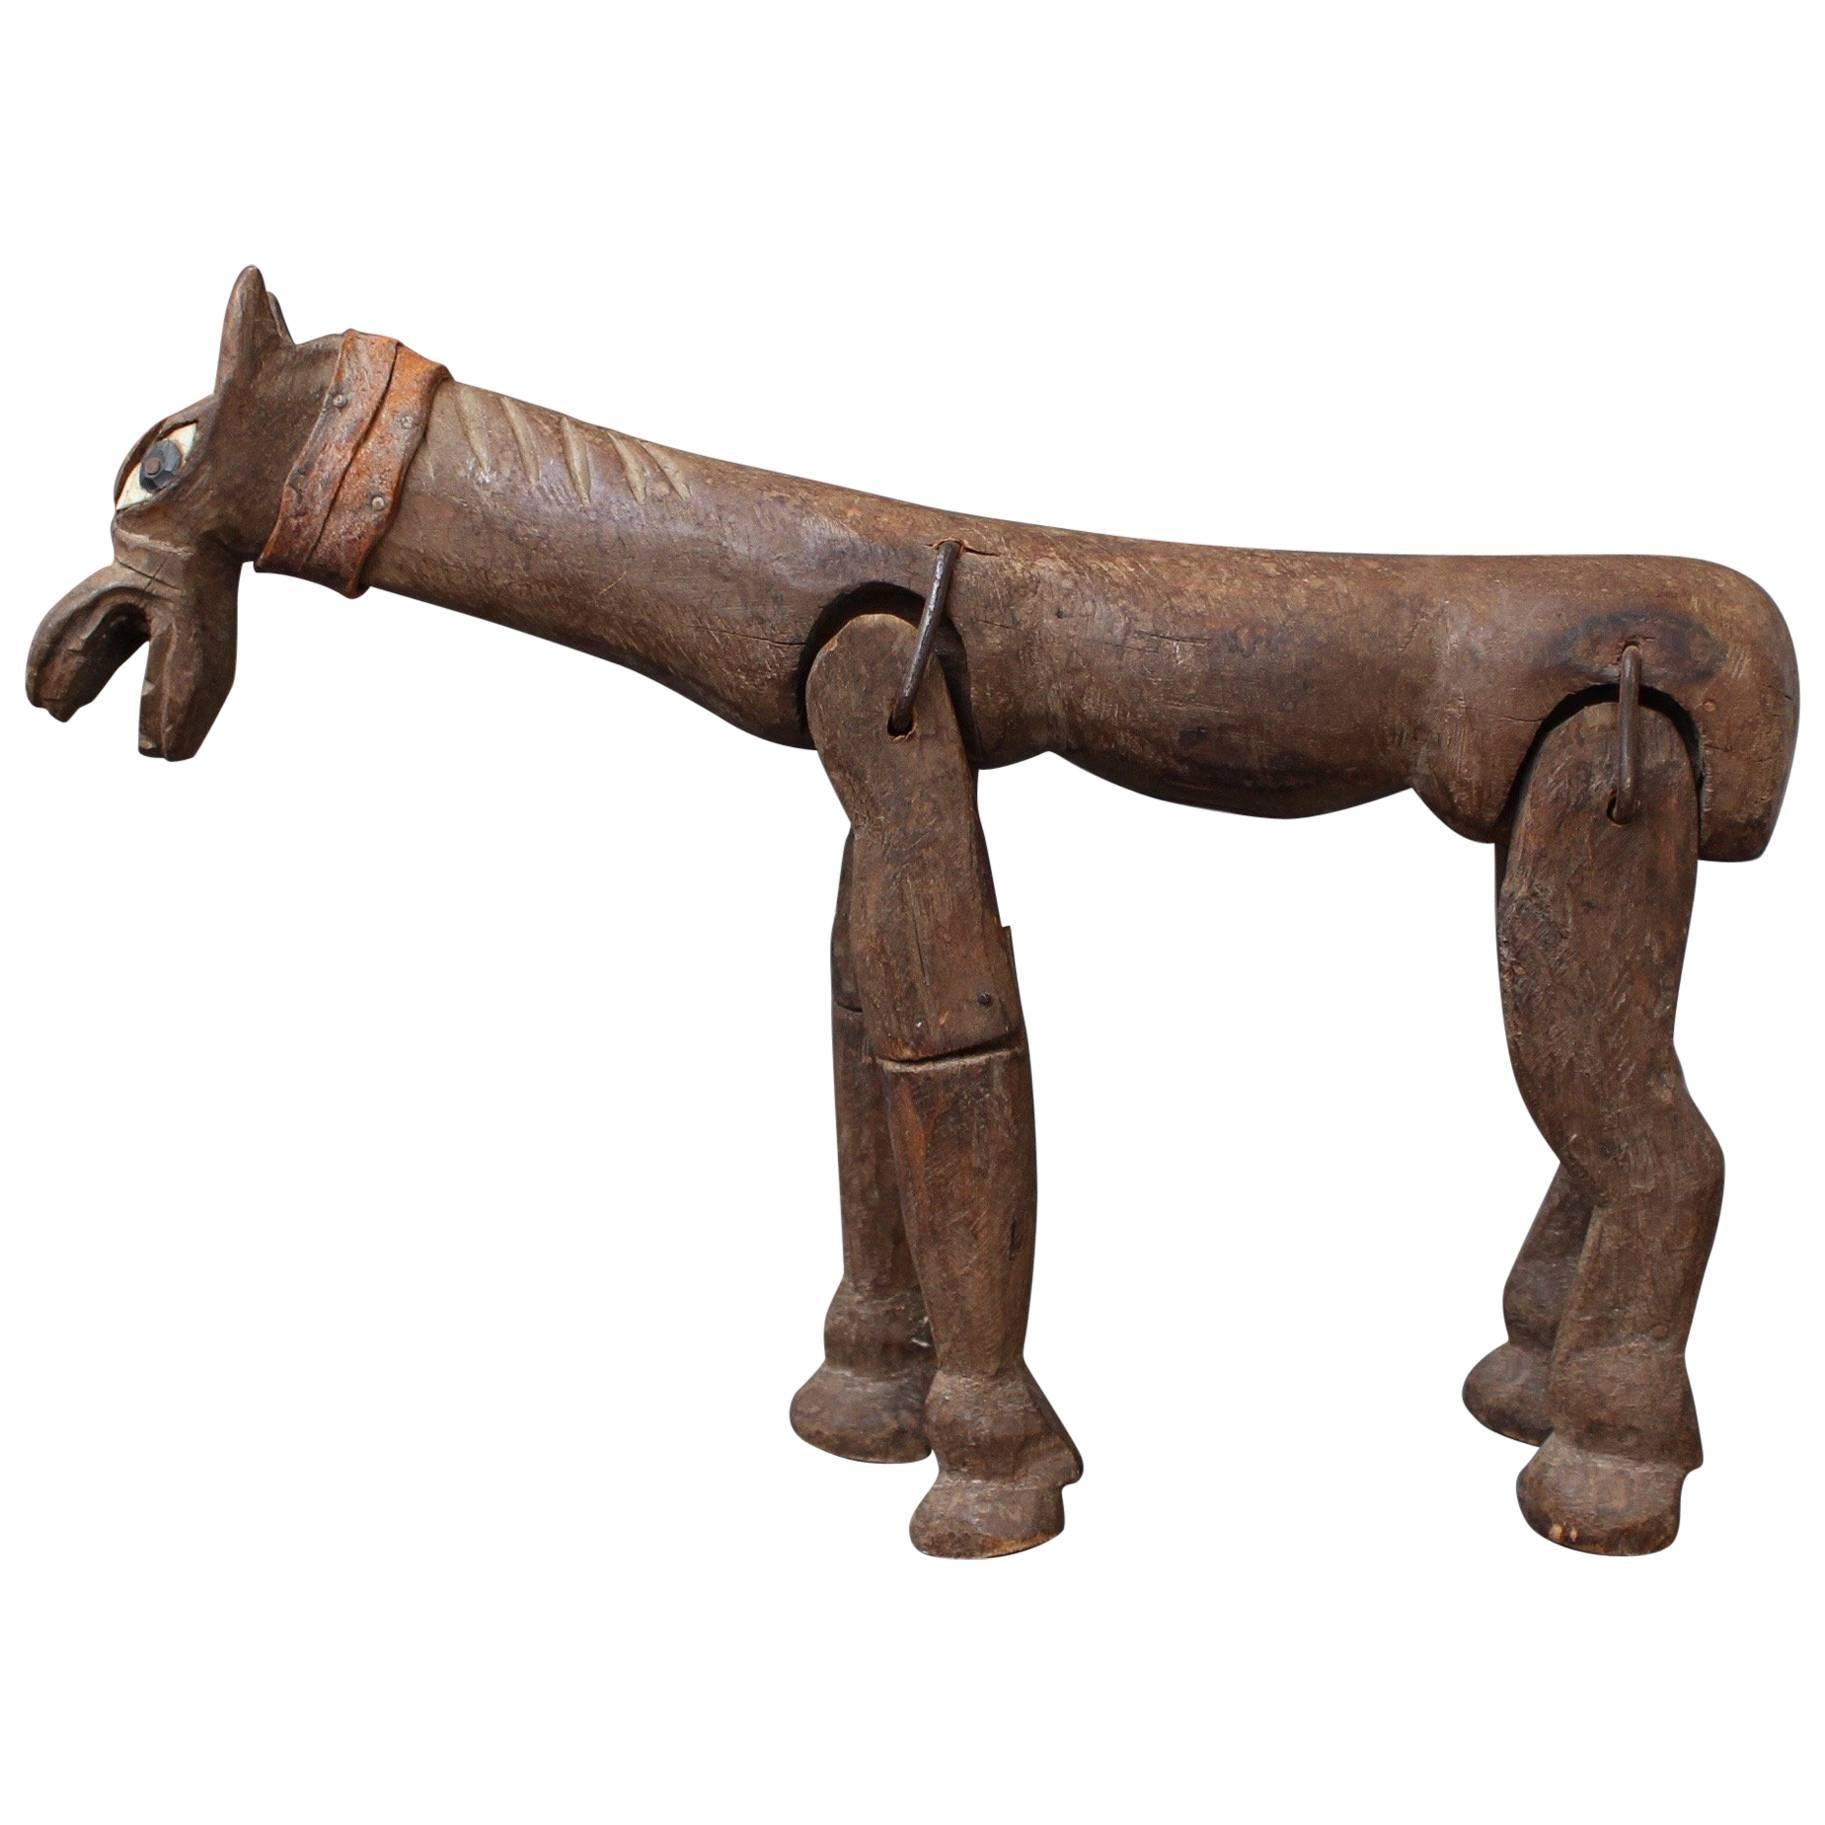 Antique Carved Wooden Horse Marionette, 19th Century